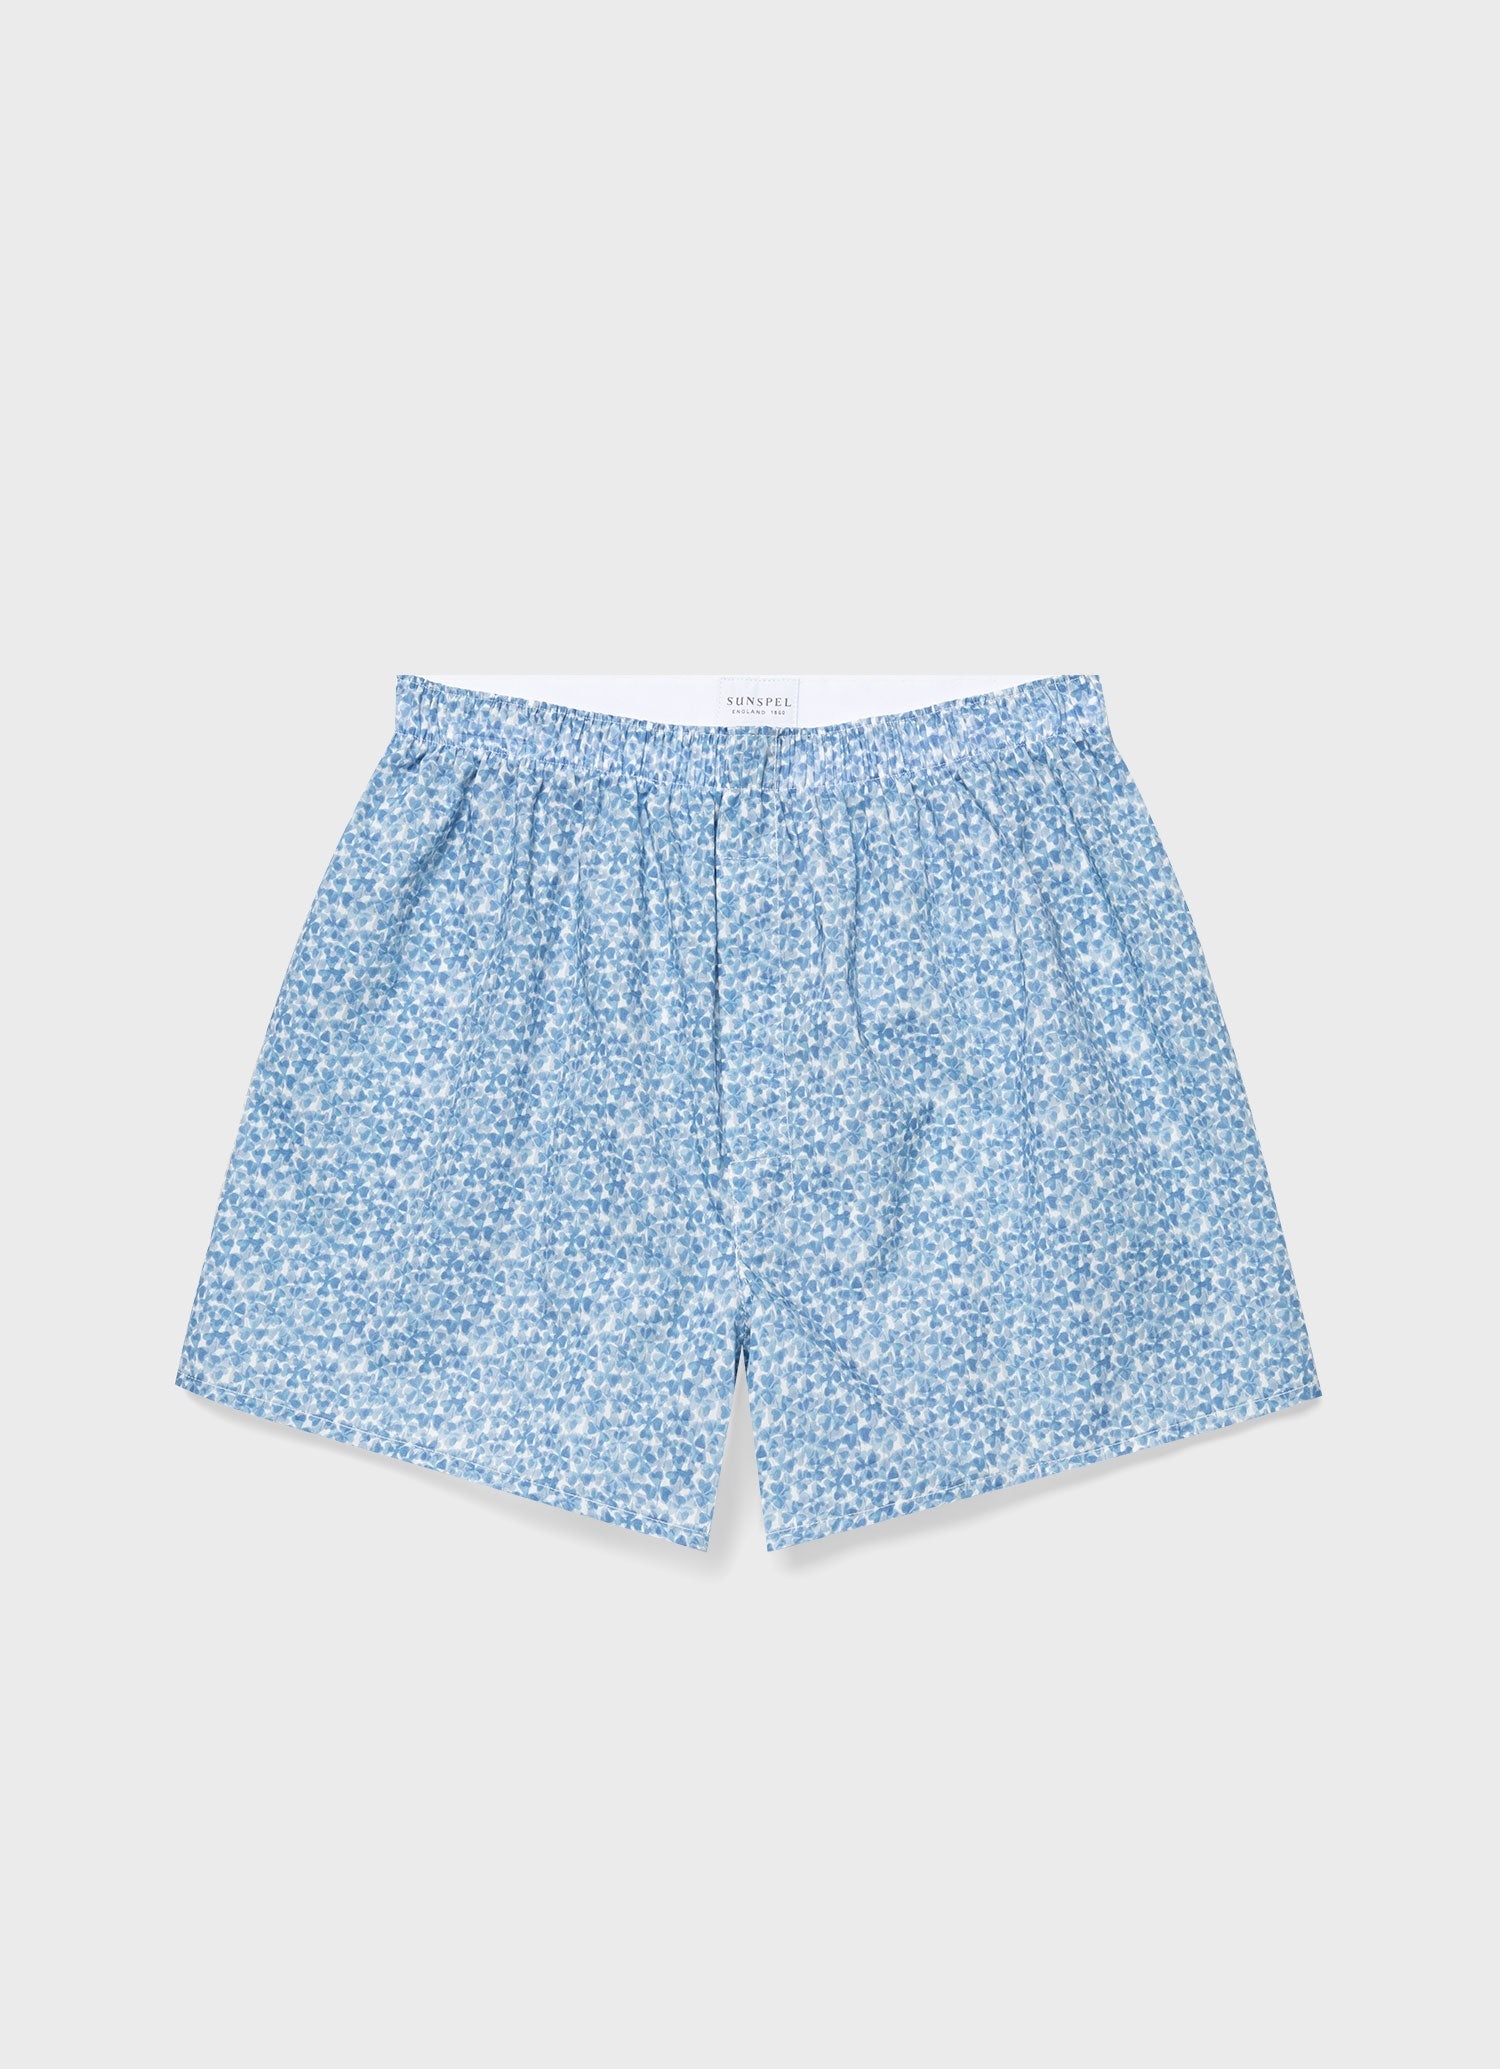 Classic Boxer Shorts in Liberty Fabric - 1